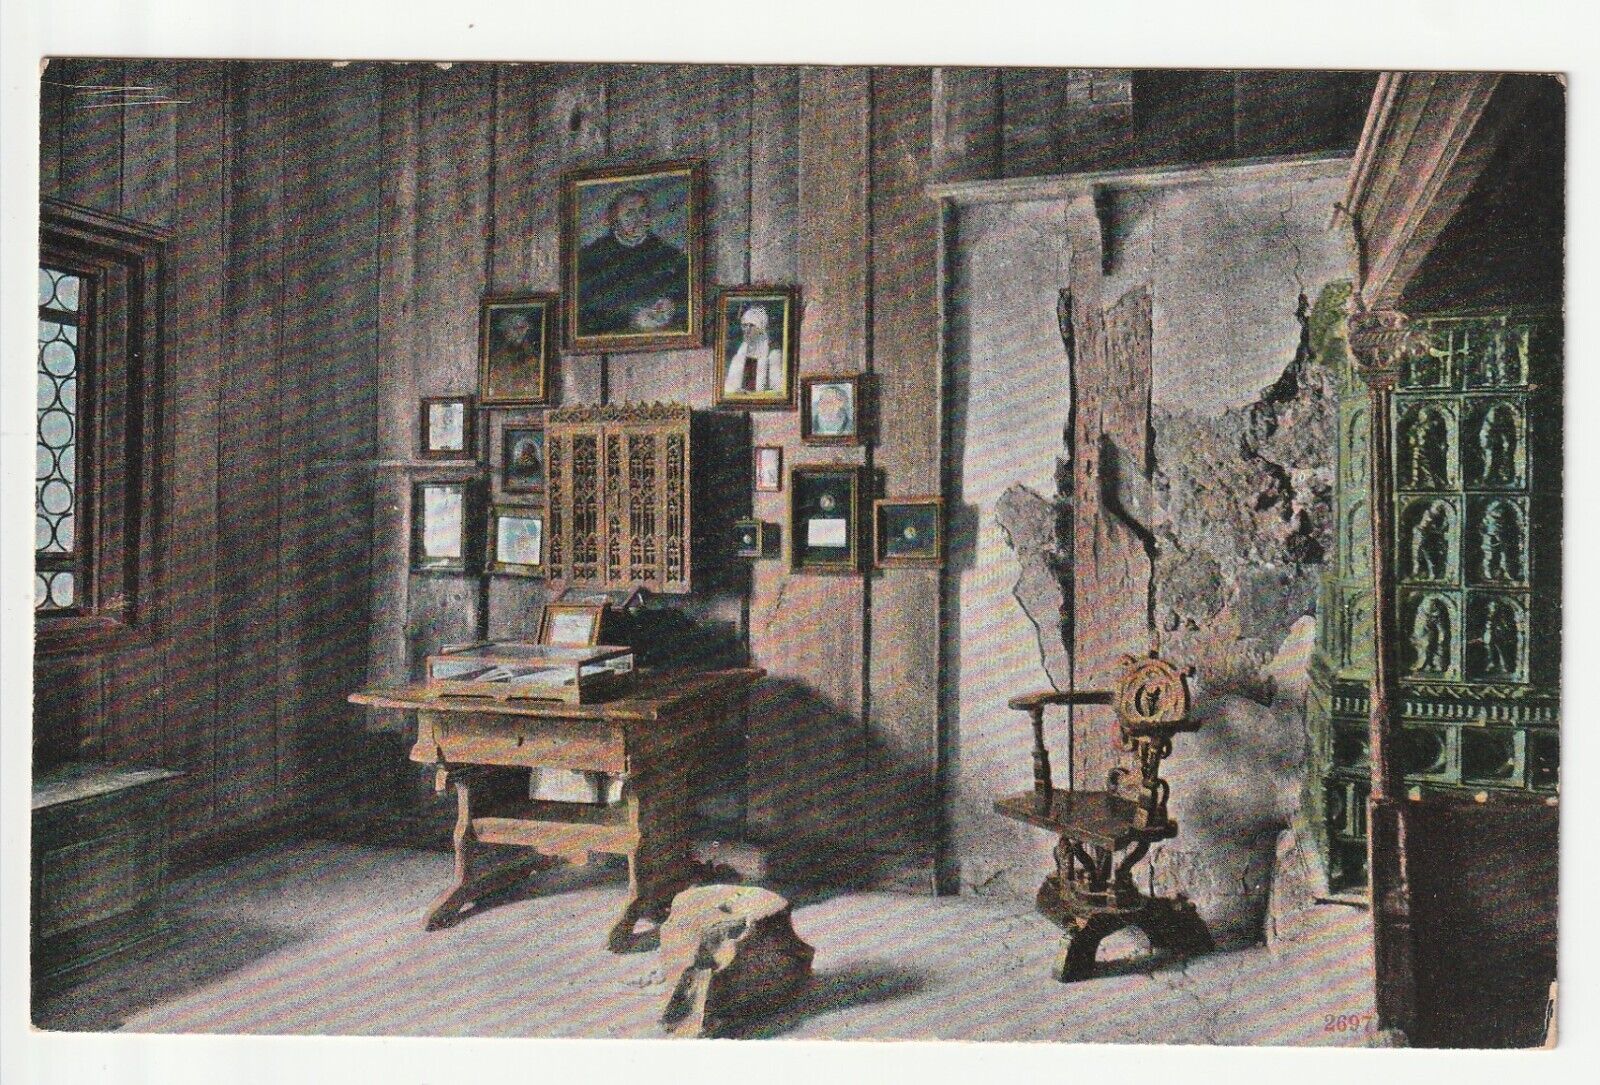 GERMANY - GERMANY - Old Postcard - Miscellaneous the Luther Room in the Wartburg